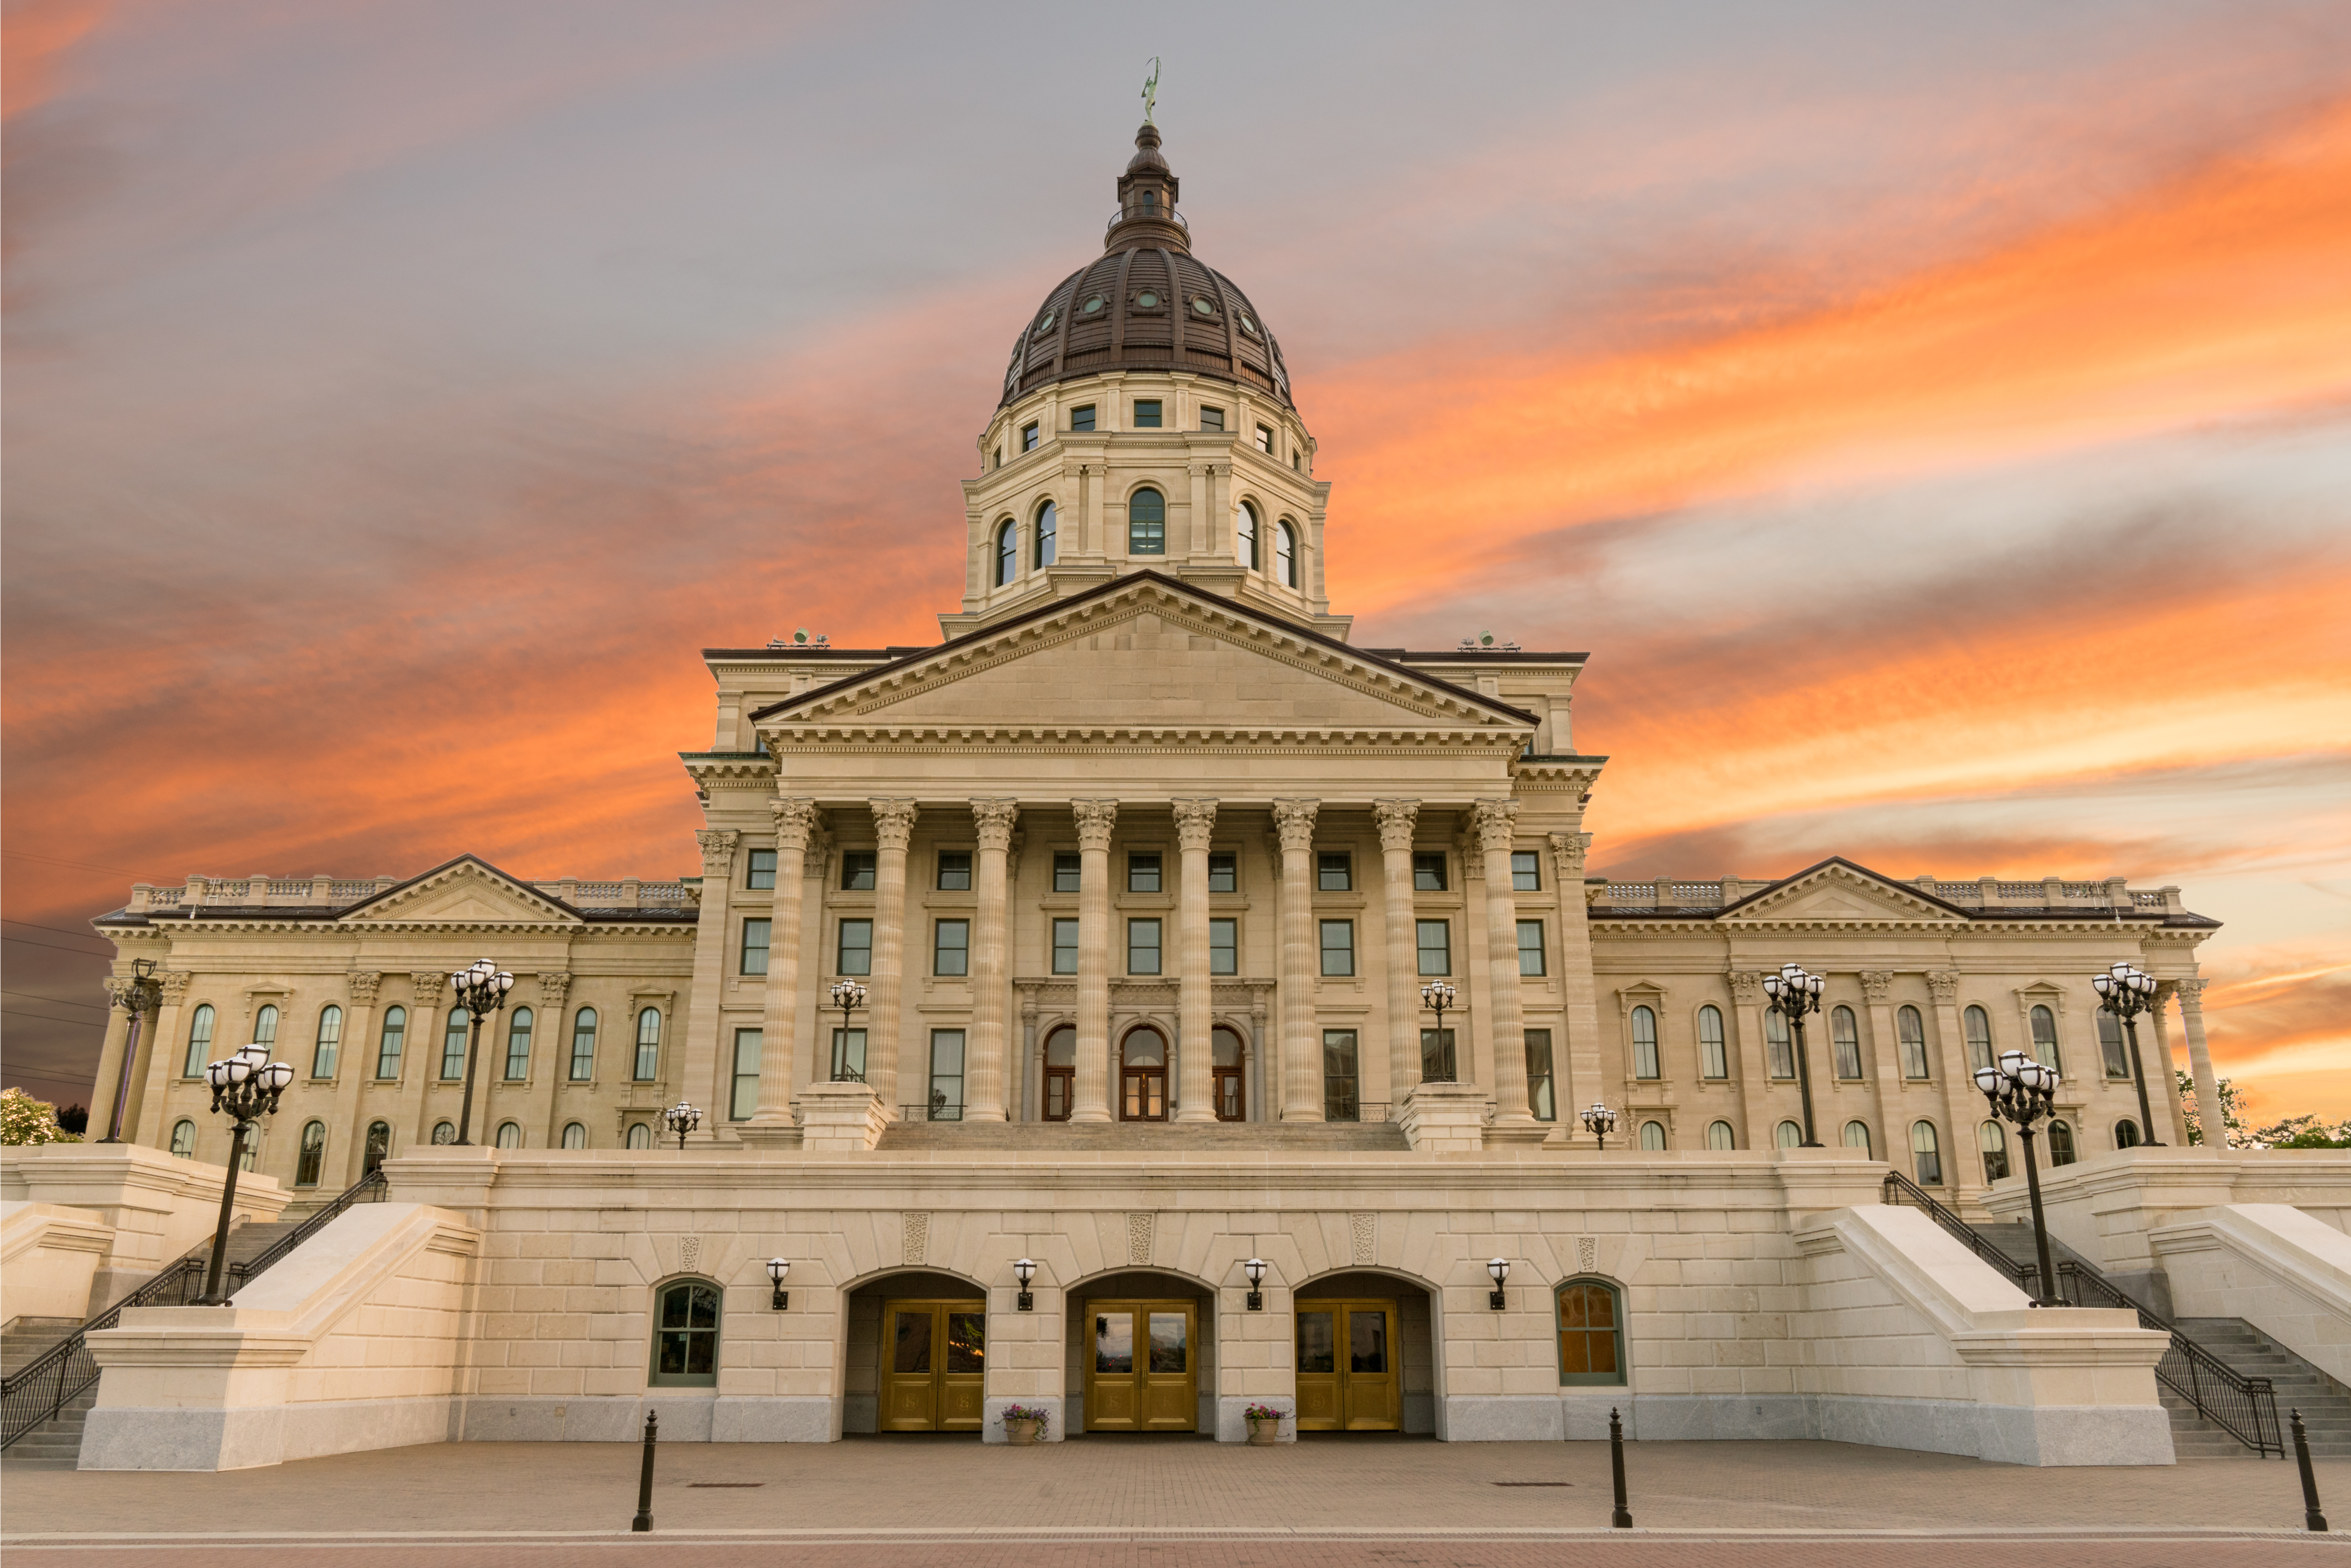 The historic Kansas State Capitol Building on a sweet Summer sunset, a piece on the best things to see in Kansas